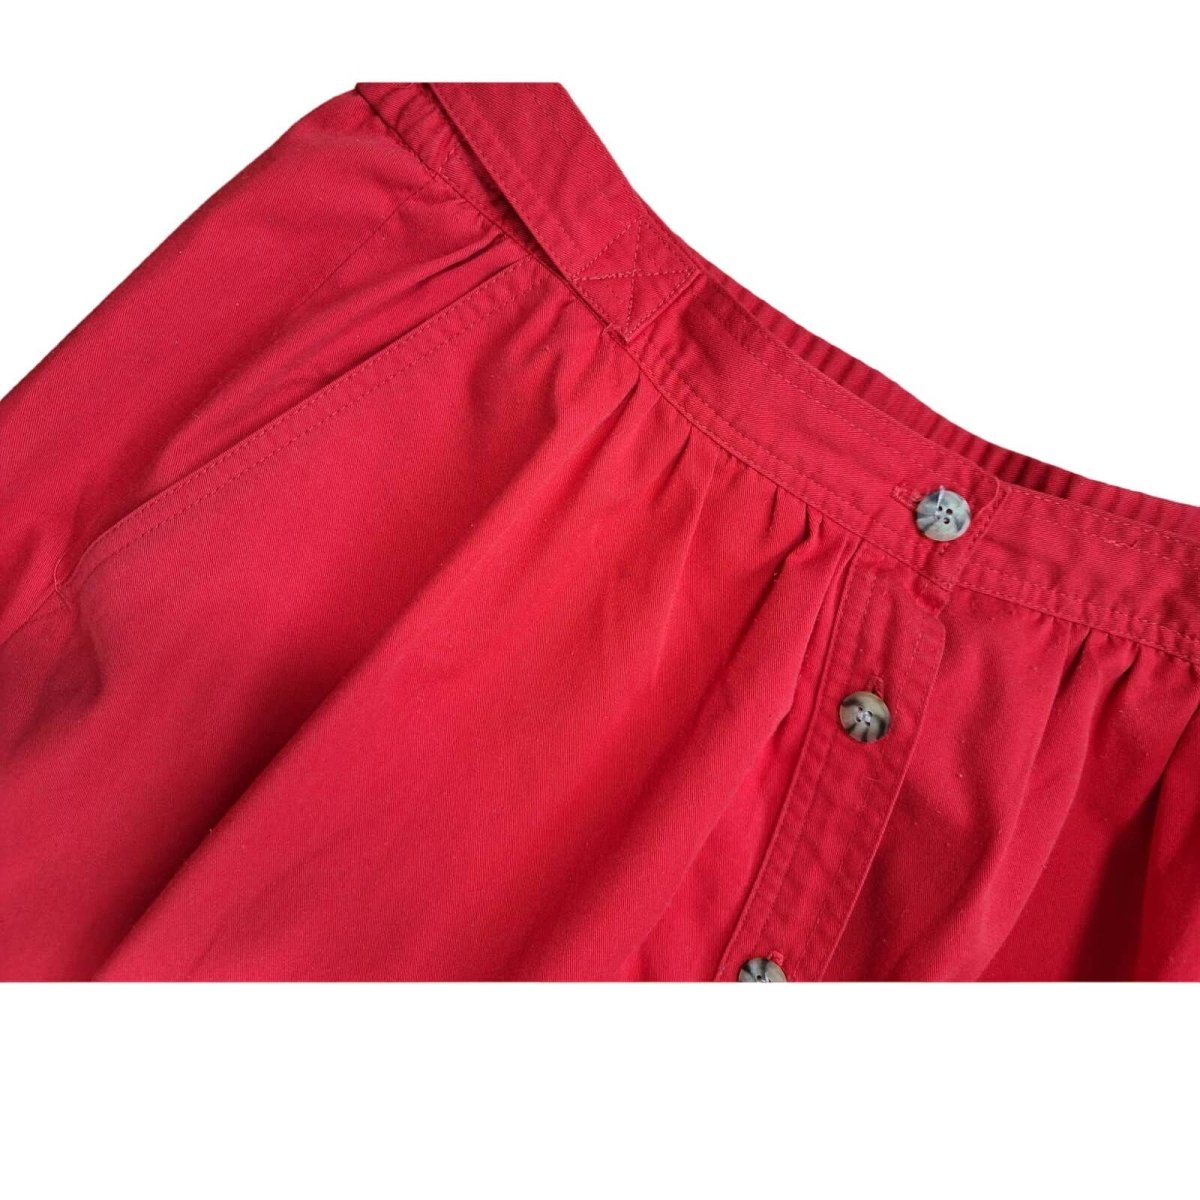 Vintage 80s Red Button Front Full Skirt Women's Size 16 Waist 32" to 38" - themallvintage The Mall Vintage